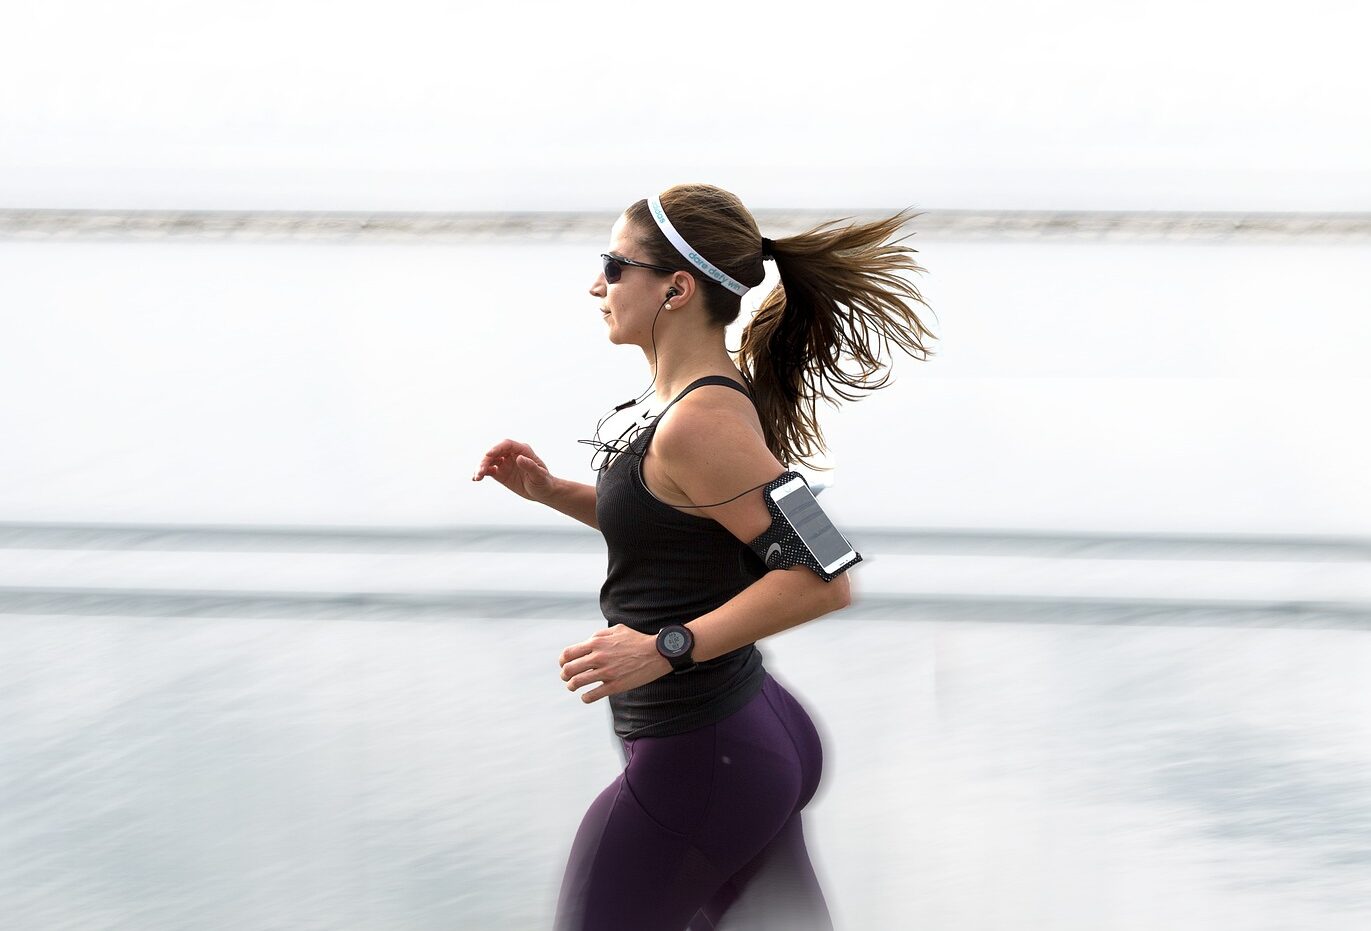 How can running and strength training combined lead to weight loss